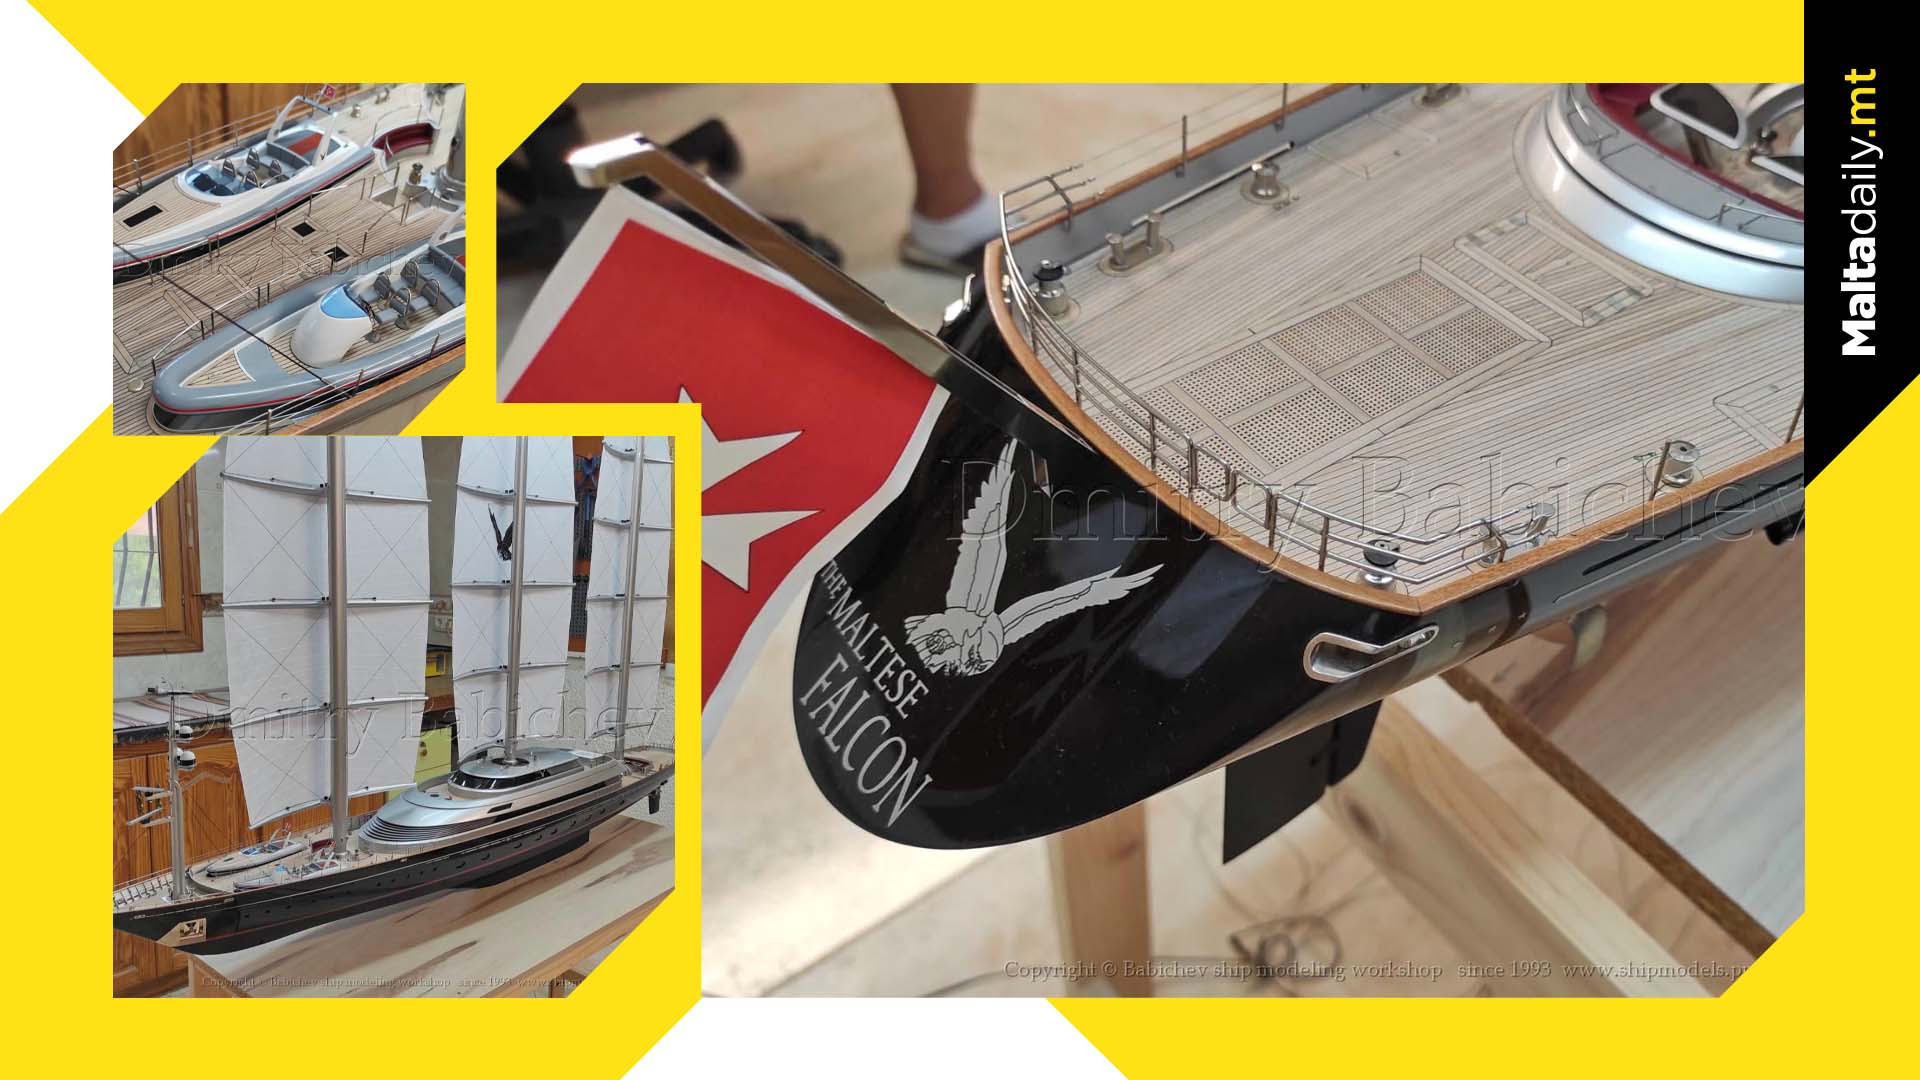 Have A Look At This Maltese Falcon Yacht Model